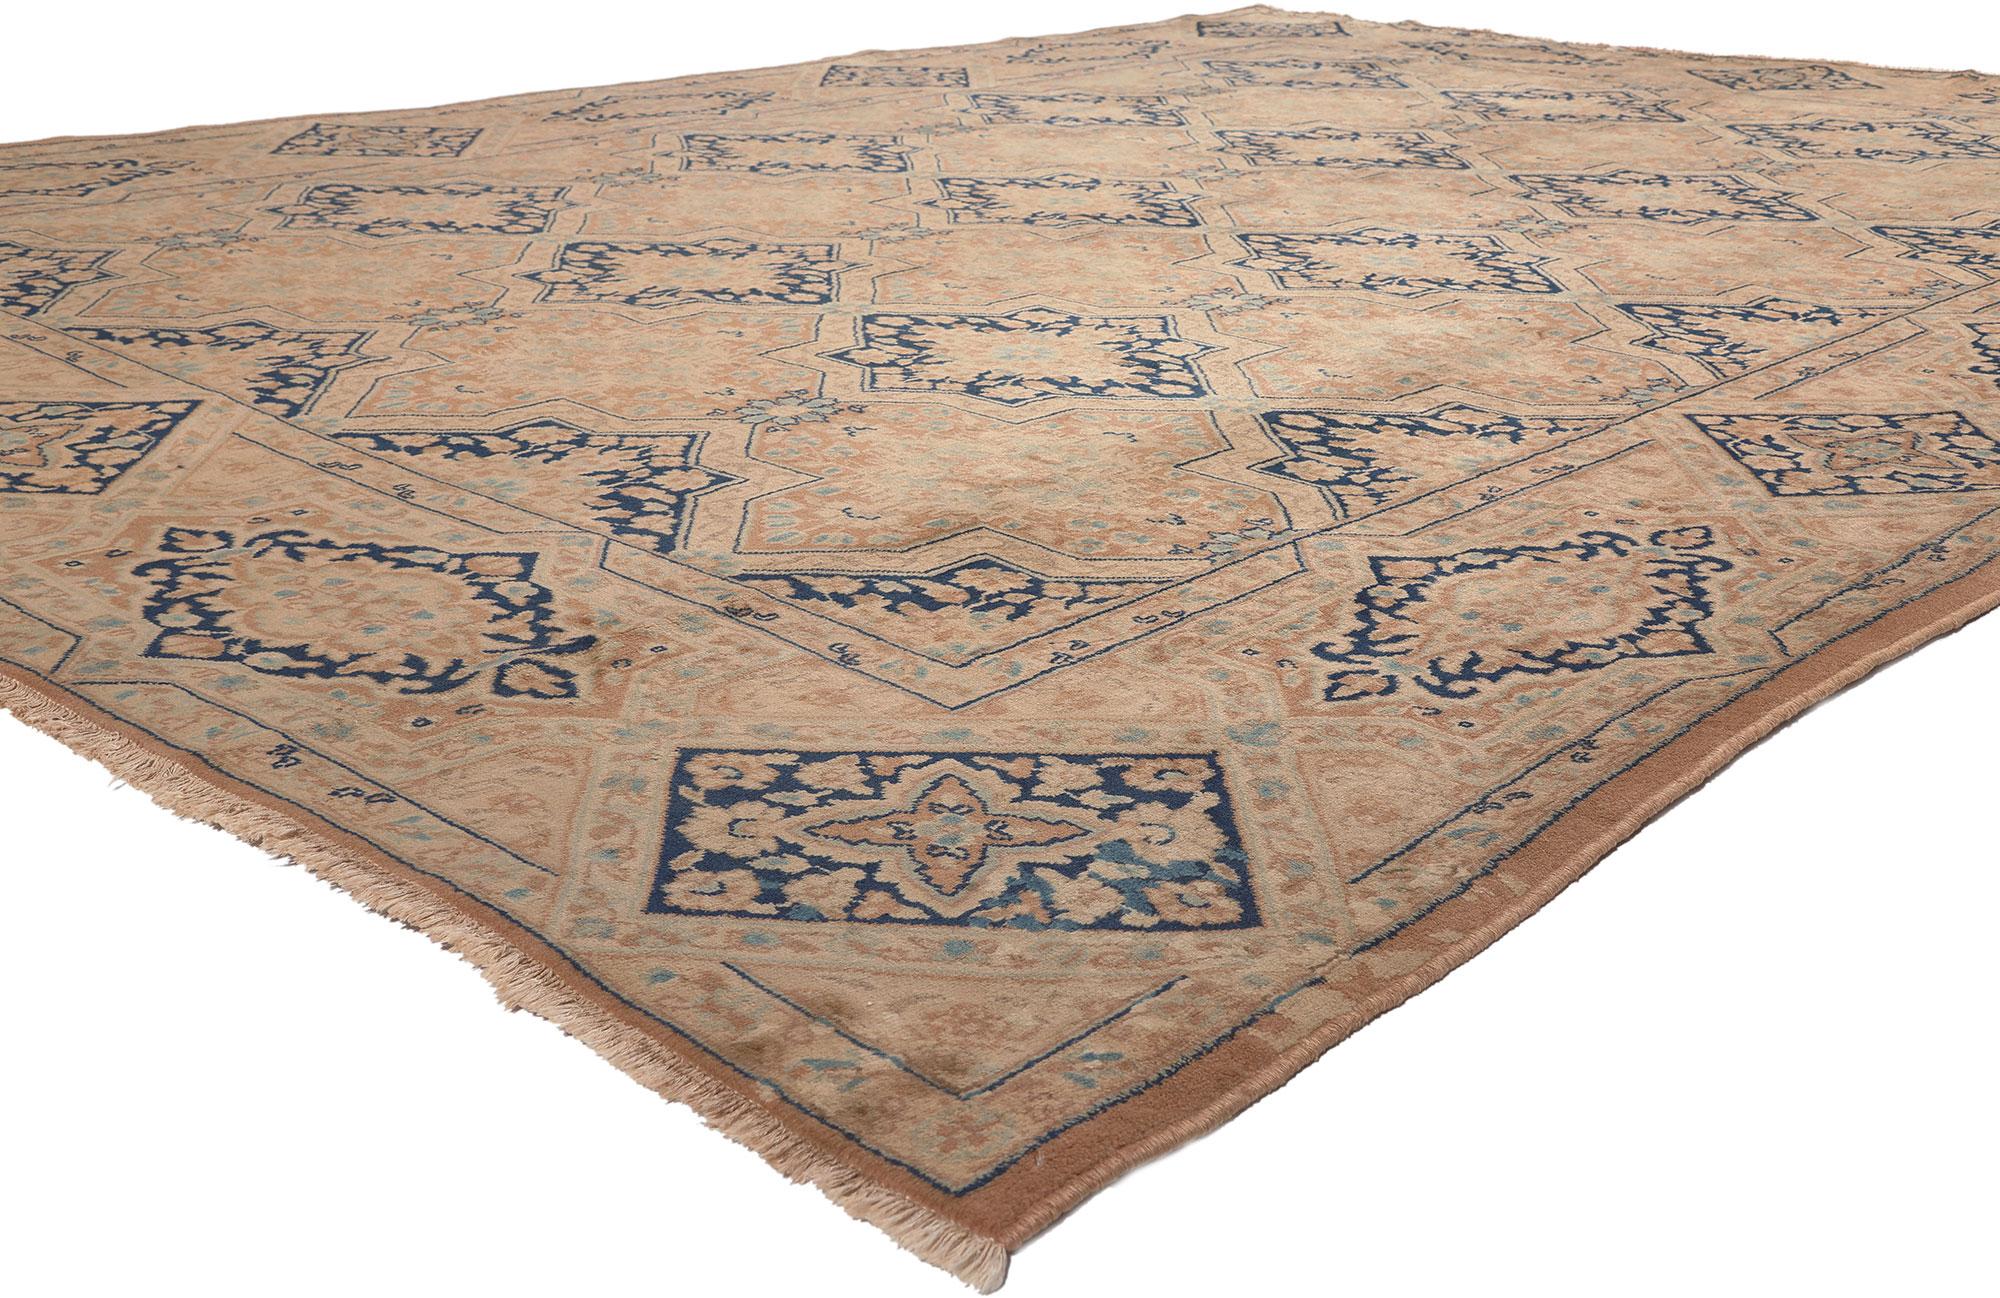 76298 Vintage Persian Kerman Rug, 09'06 x 13'00.
Enchanging elegance meets tantalizing tessellation in this vintage. Persian Kerman rug. The stylish levels of complexity and earthy colors woven into this piece work together creating a soft and